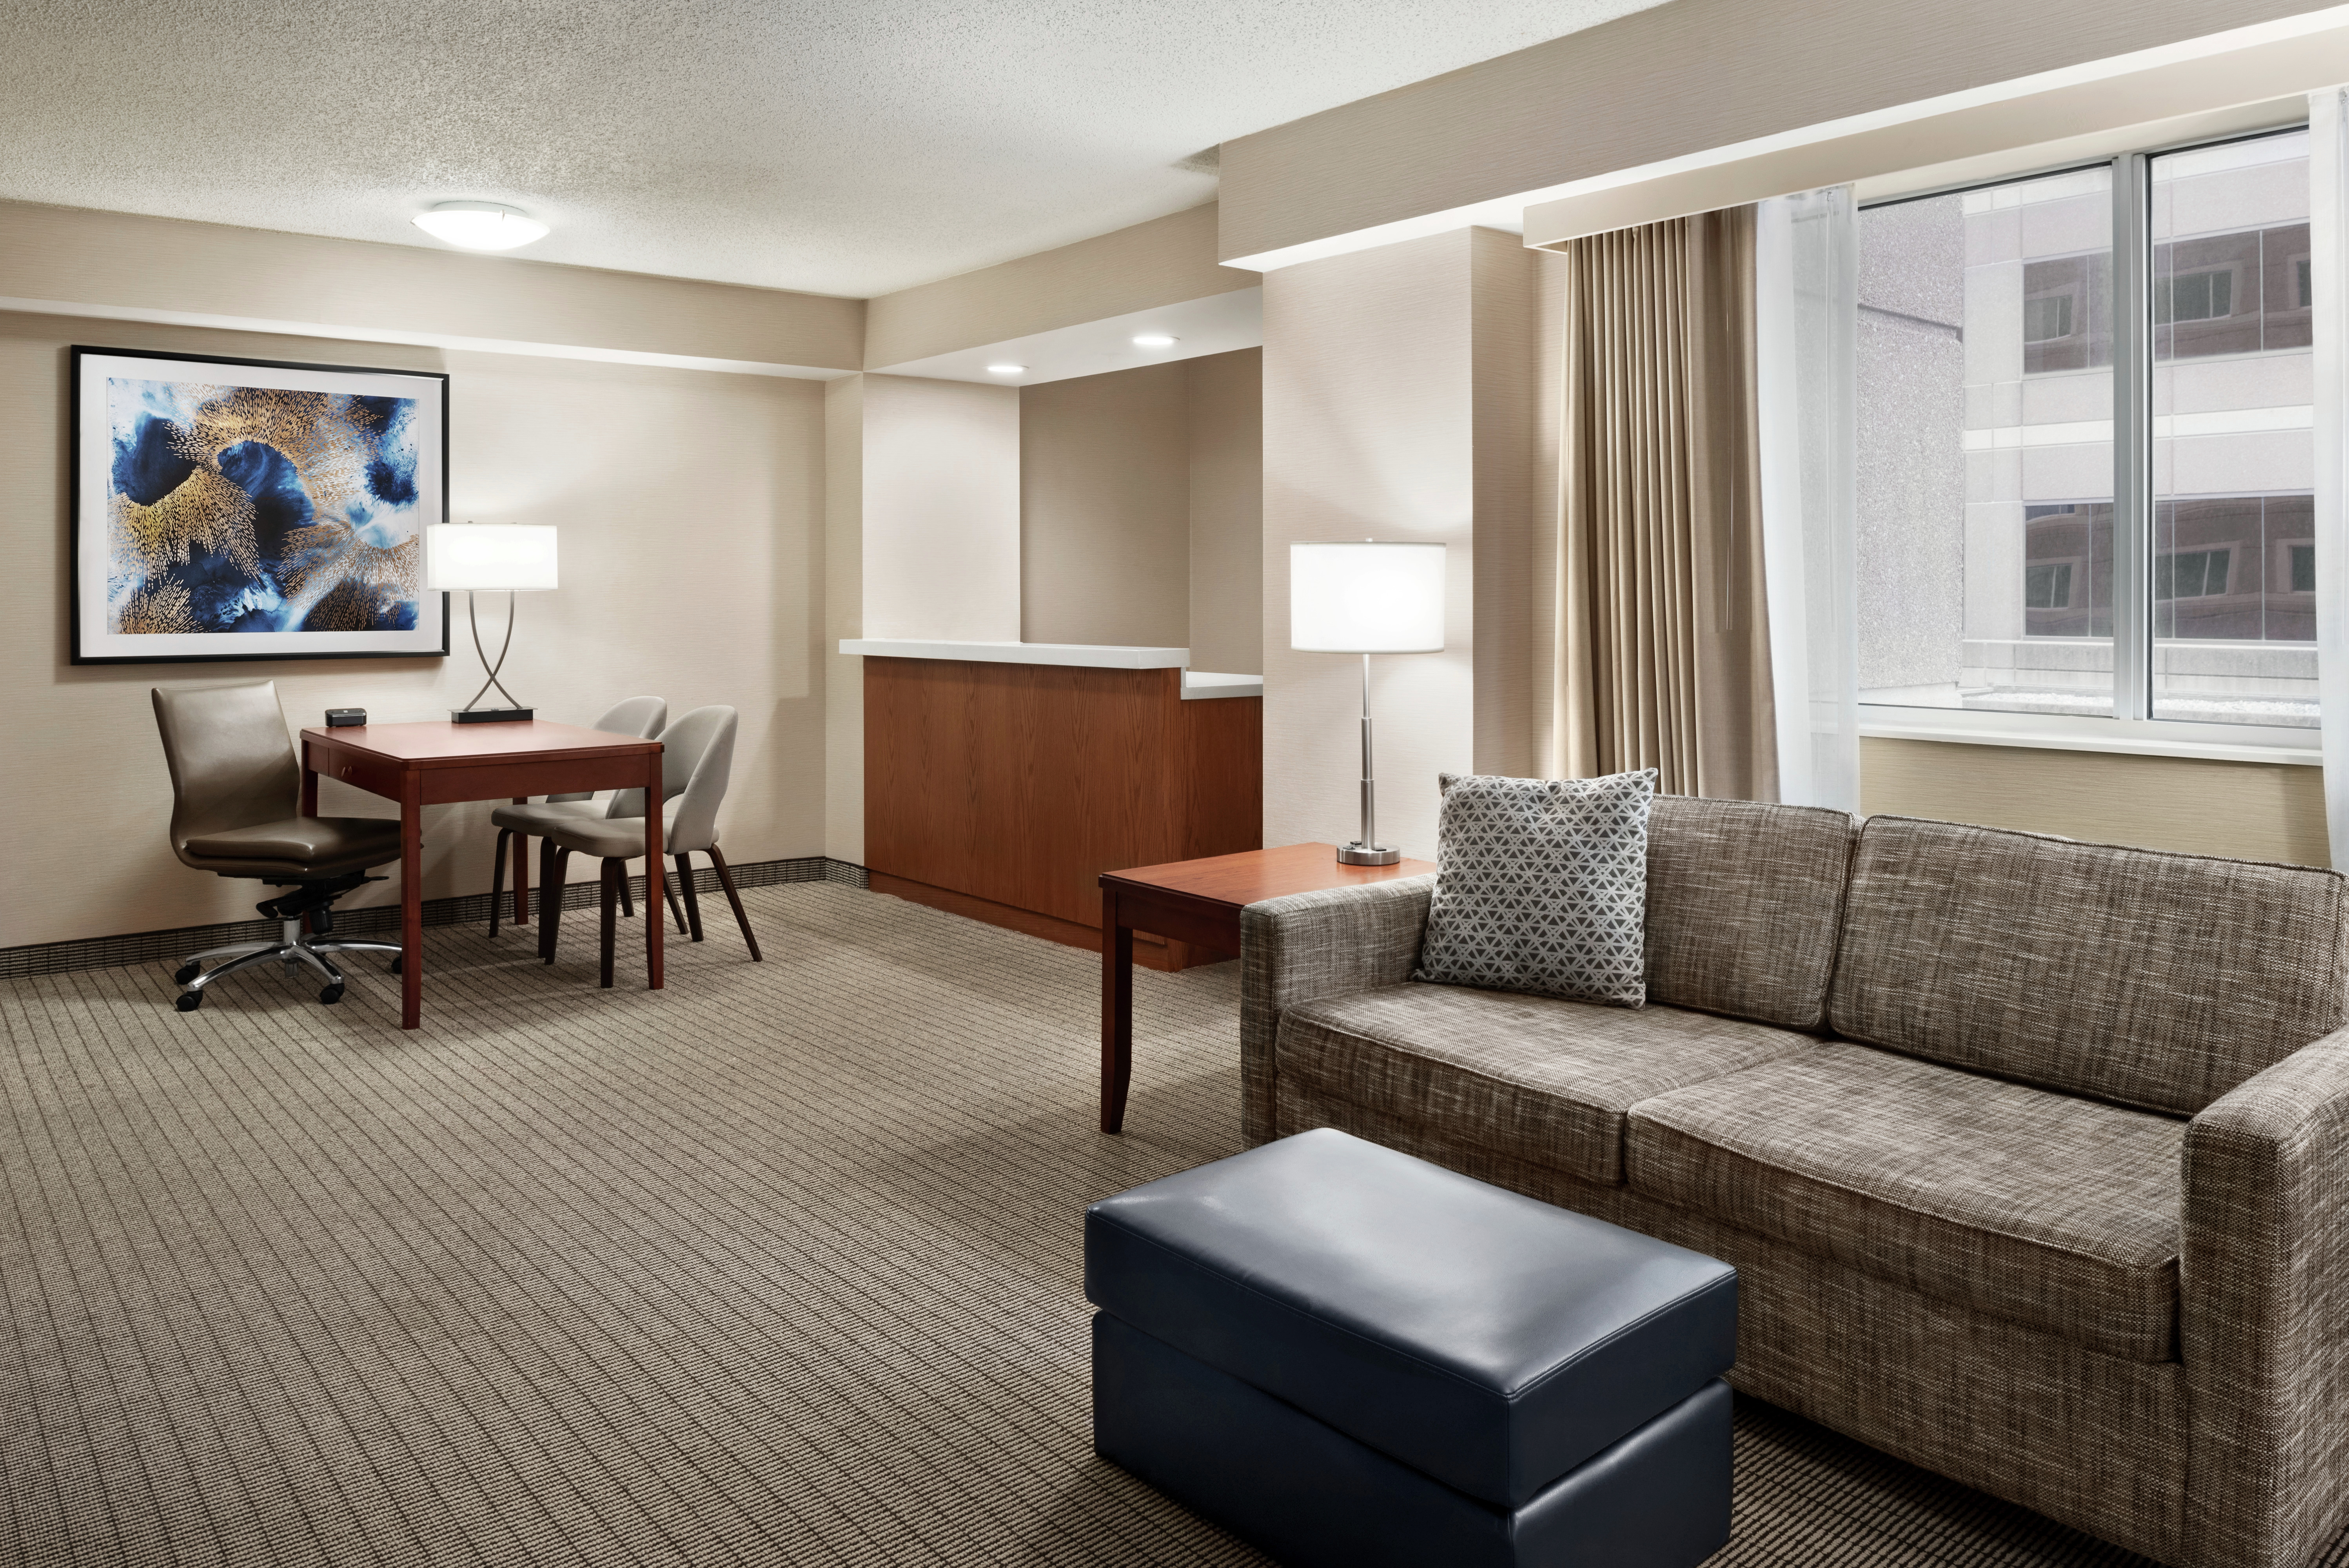 Executive Suite with Lounge Area and Work Desk with Chairs